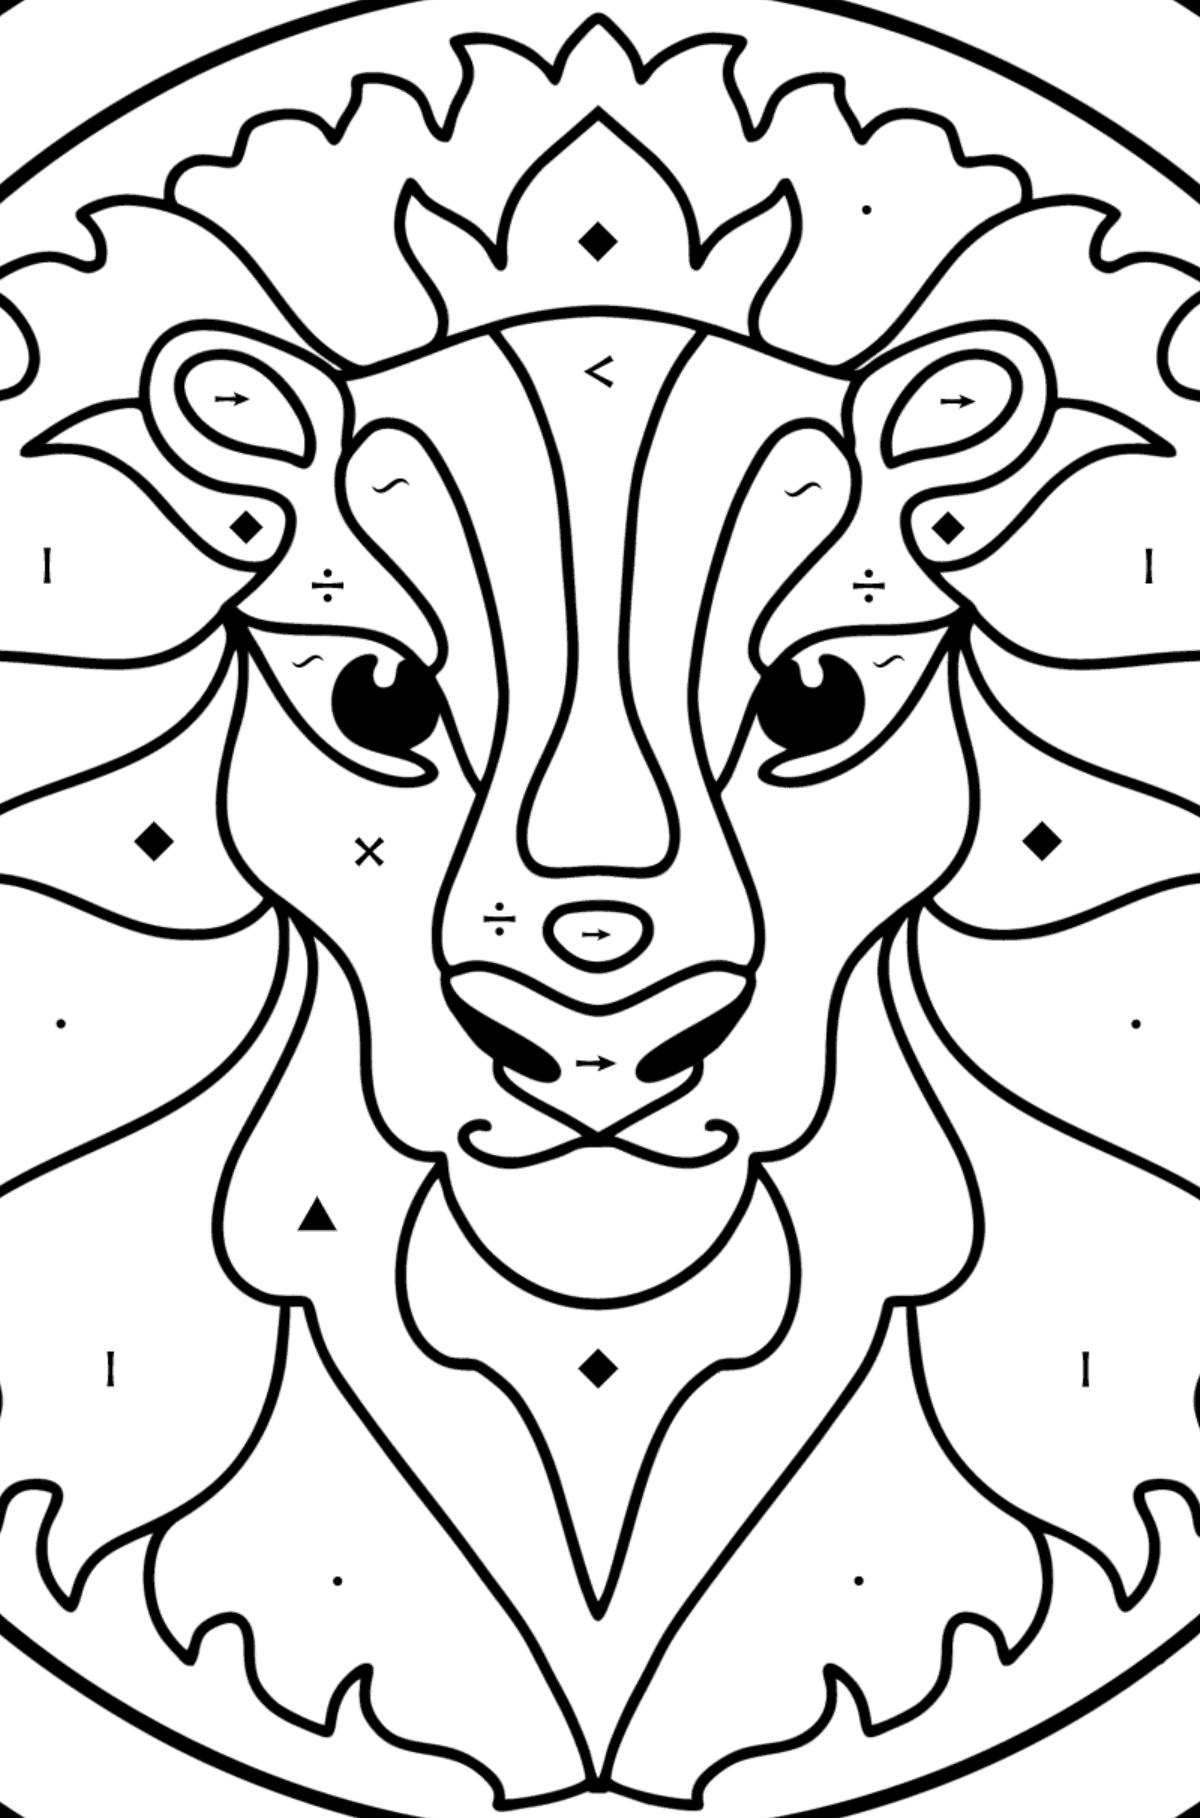 Coloring page for kids - zodiac sign Leo - Coloring by Symbols for Kids